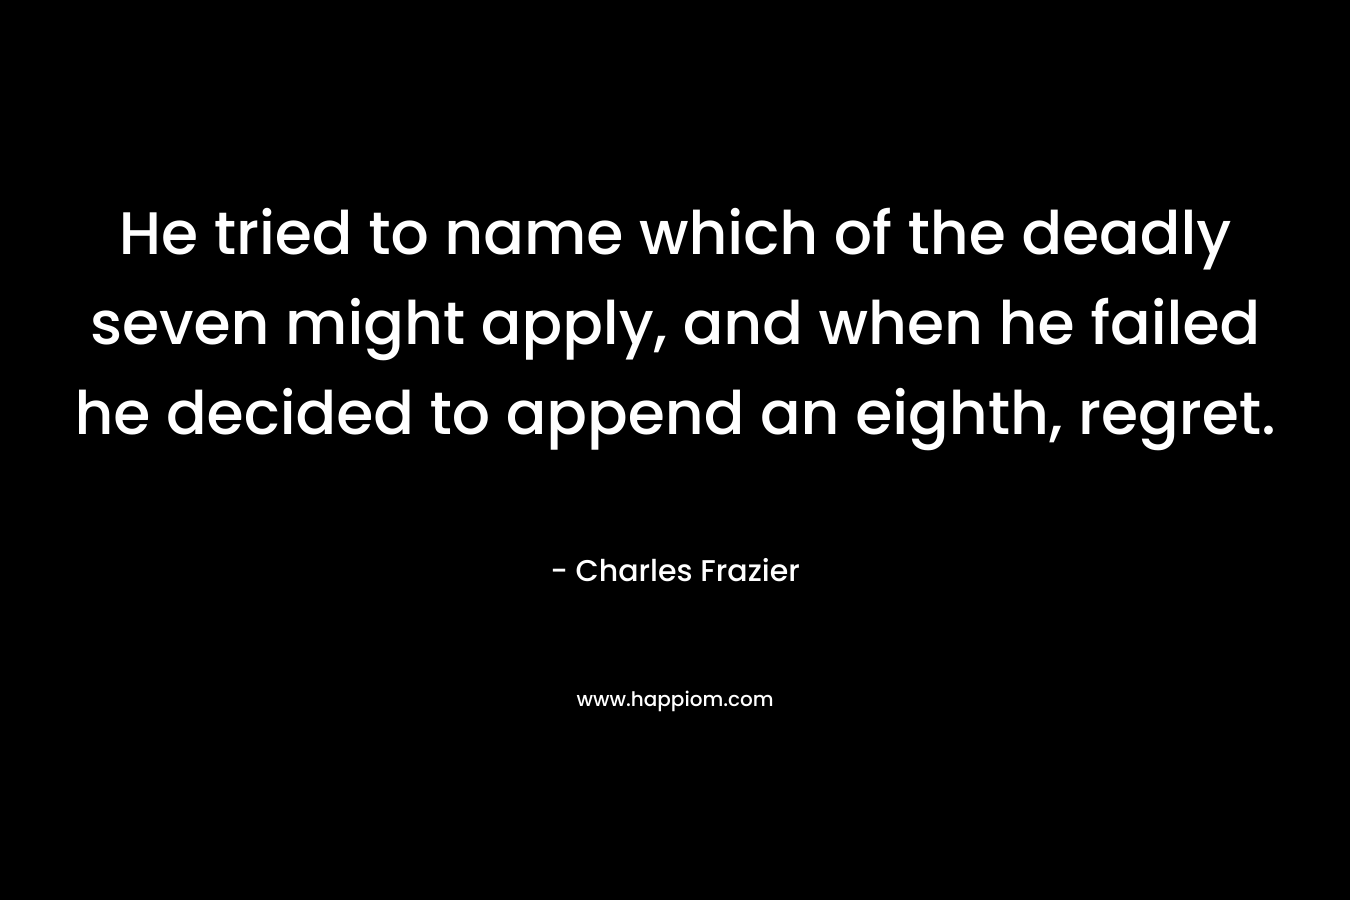 He tried to name which of the deadly seven might apply, and when he failed he decided to append an eighth, regret. – Charles Frazier